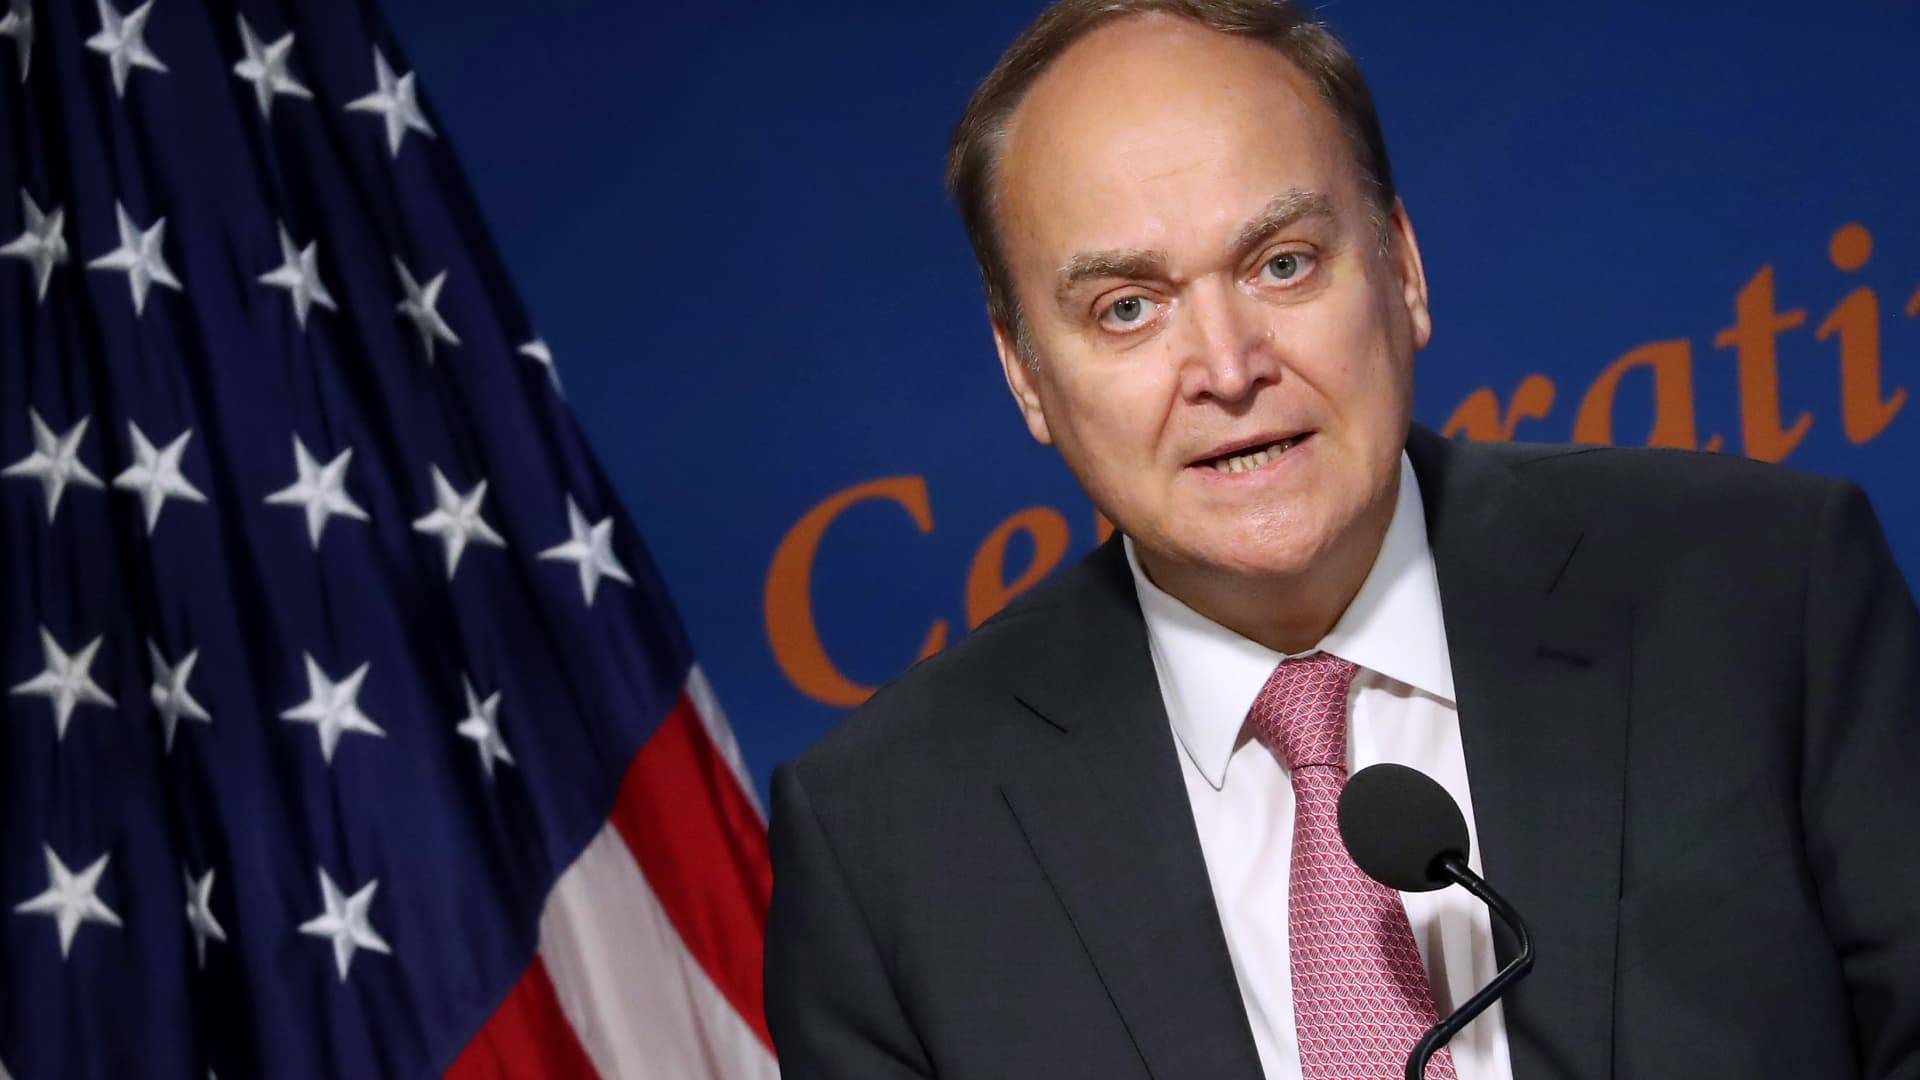 Russian Ambassador to the United States Anatoly Antonov speaks during a discussion about the legacy of Anatoly Dobrynin at the Woodrow Wilson Institute on November 18, 2019 in Washington, DC.